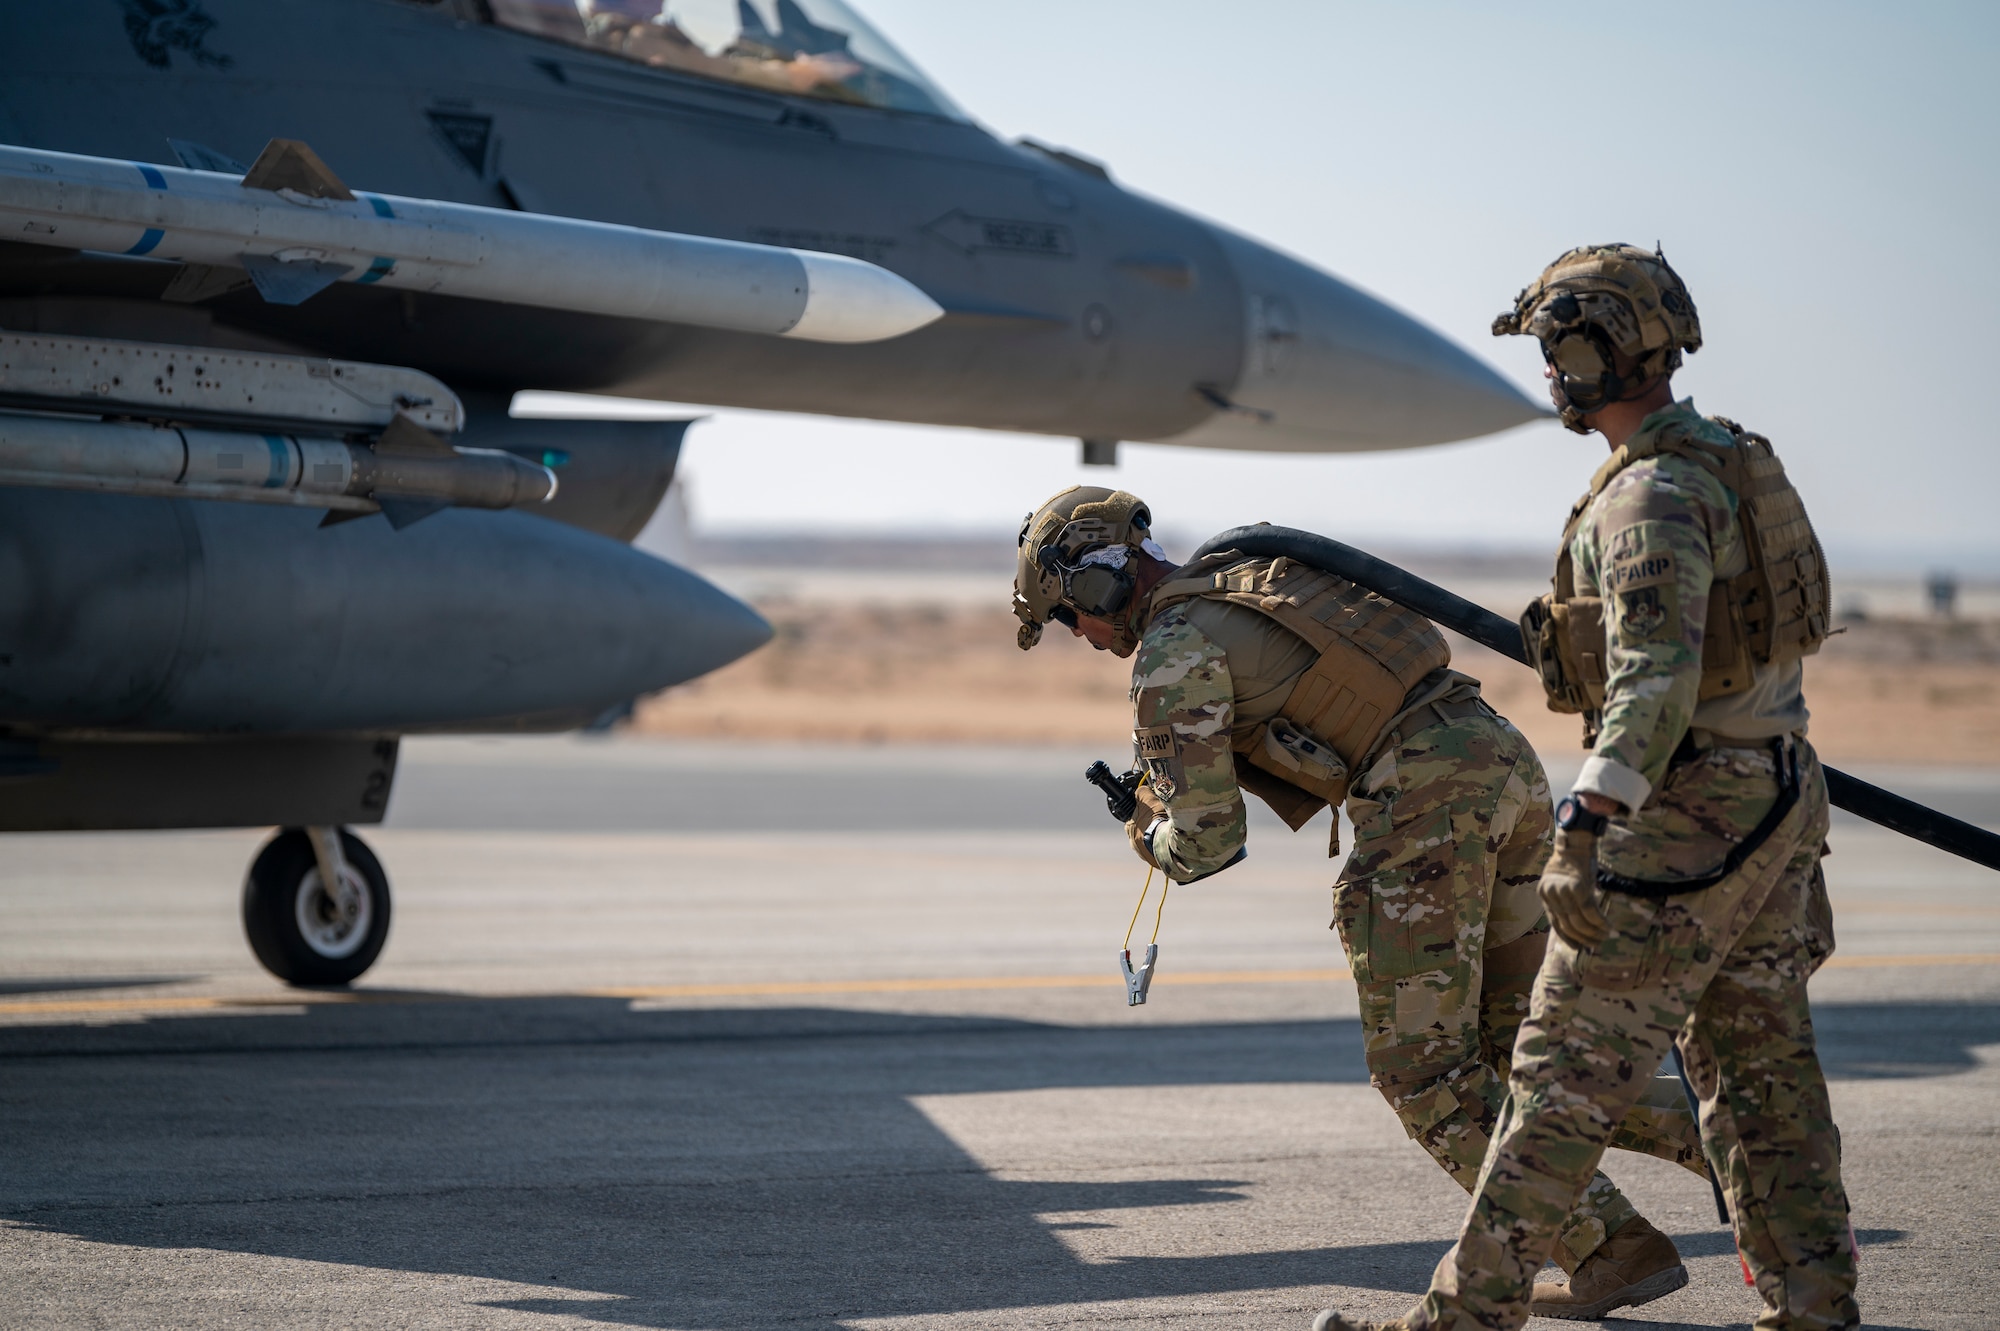 U.S. Airmen from the 26th Expeditionary Rescue Squadron set up a Forward Area Refueling Point (FARP) for two F-16C Fighting Falcons Nov. 26, 2021, at an undisclosed location somewhere in Southwest Asia.